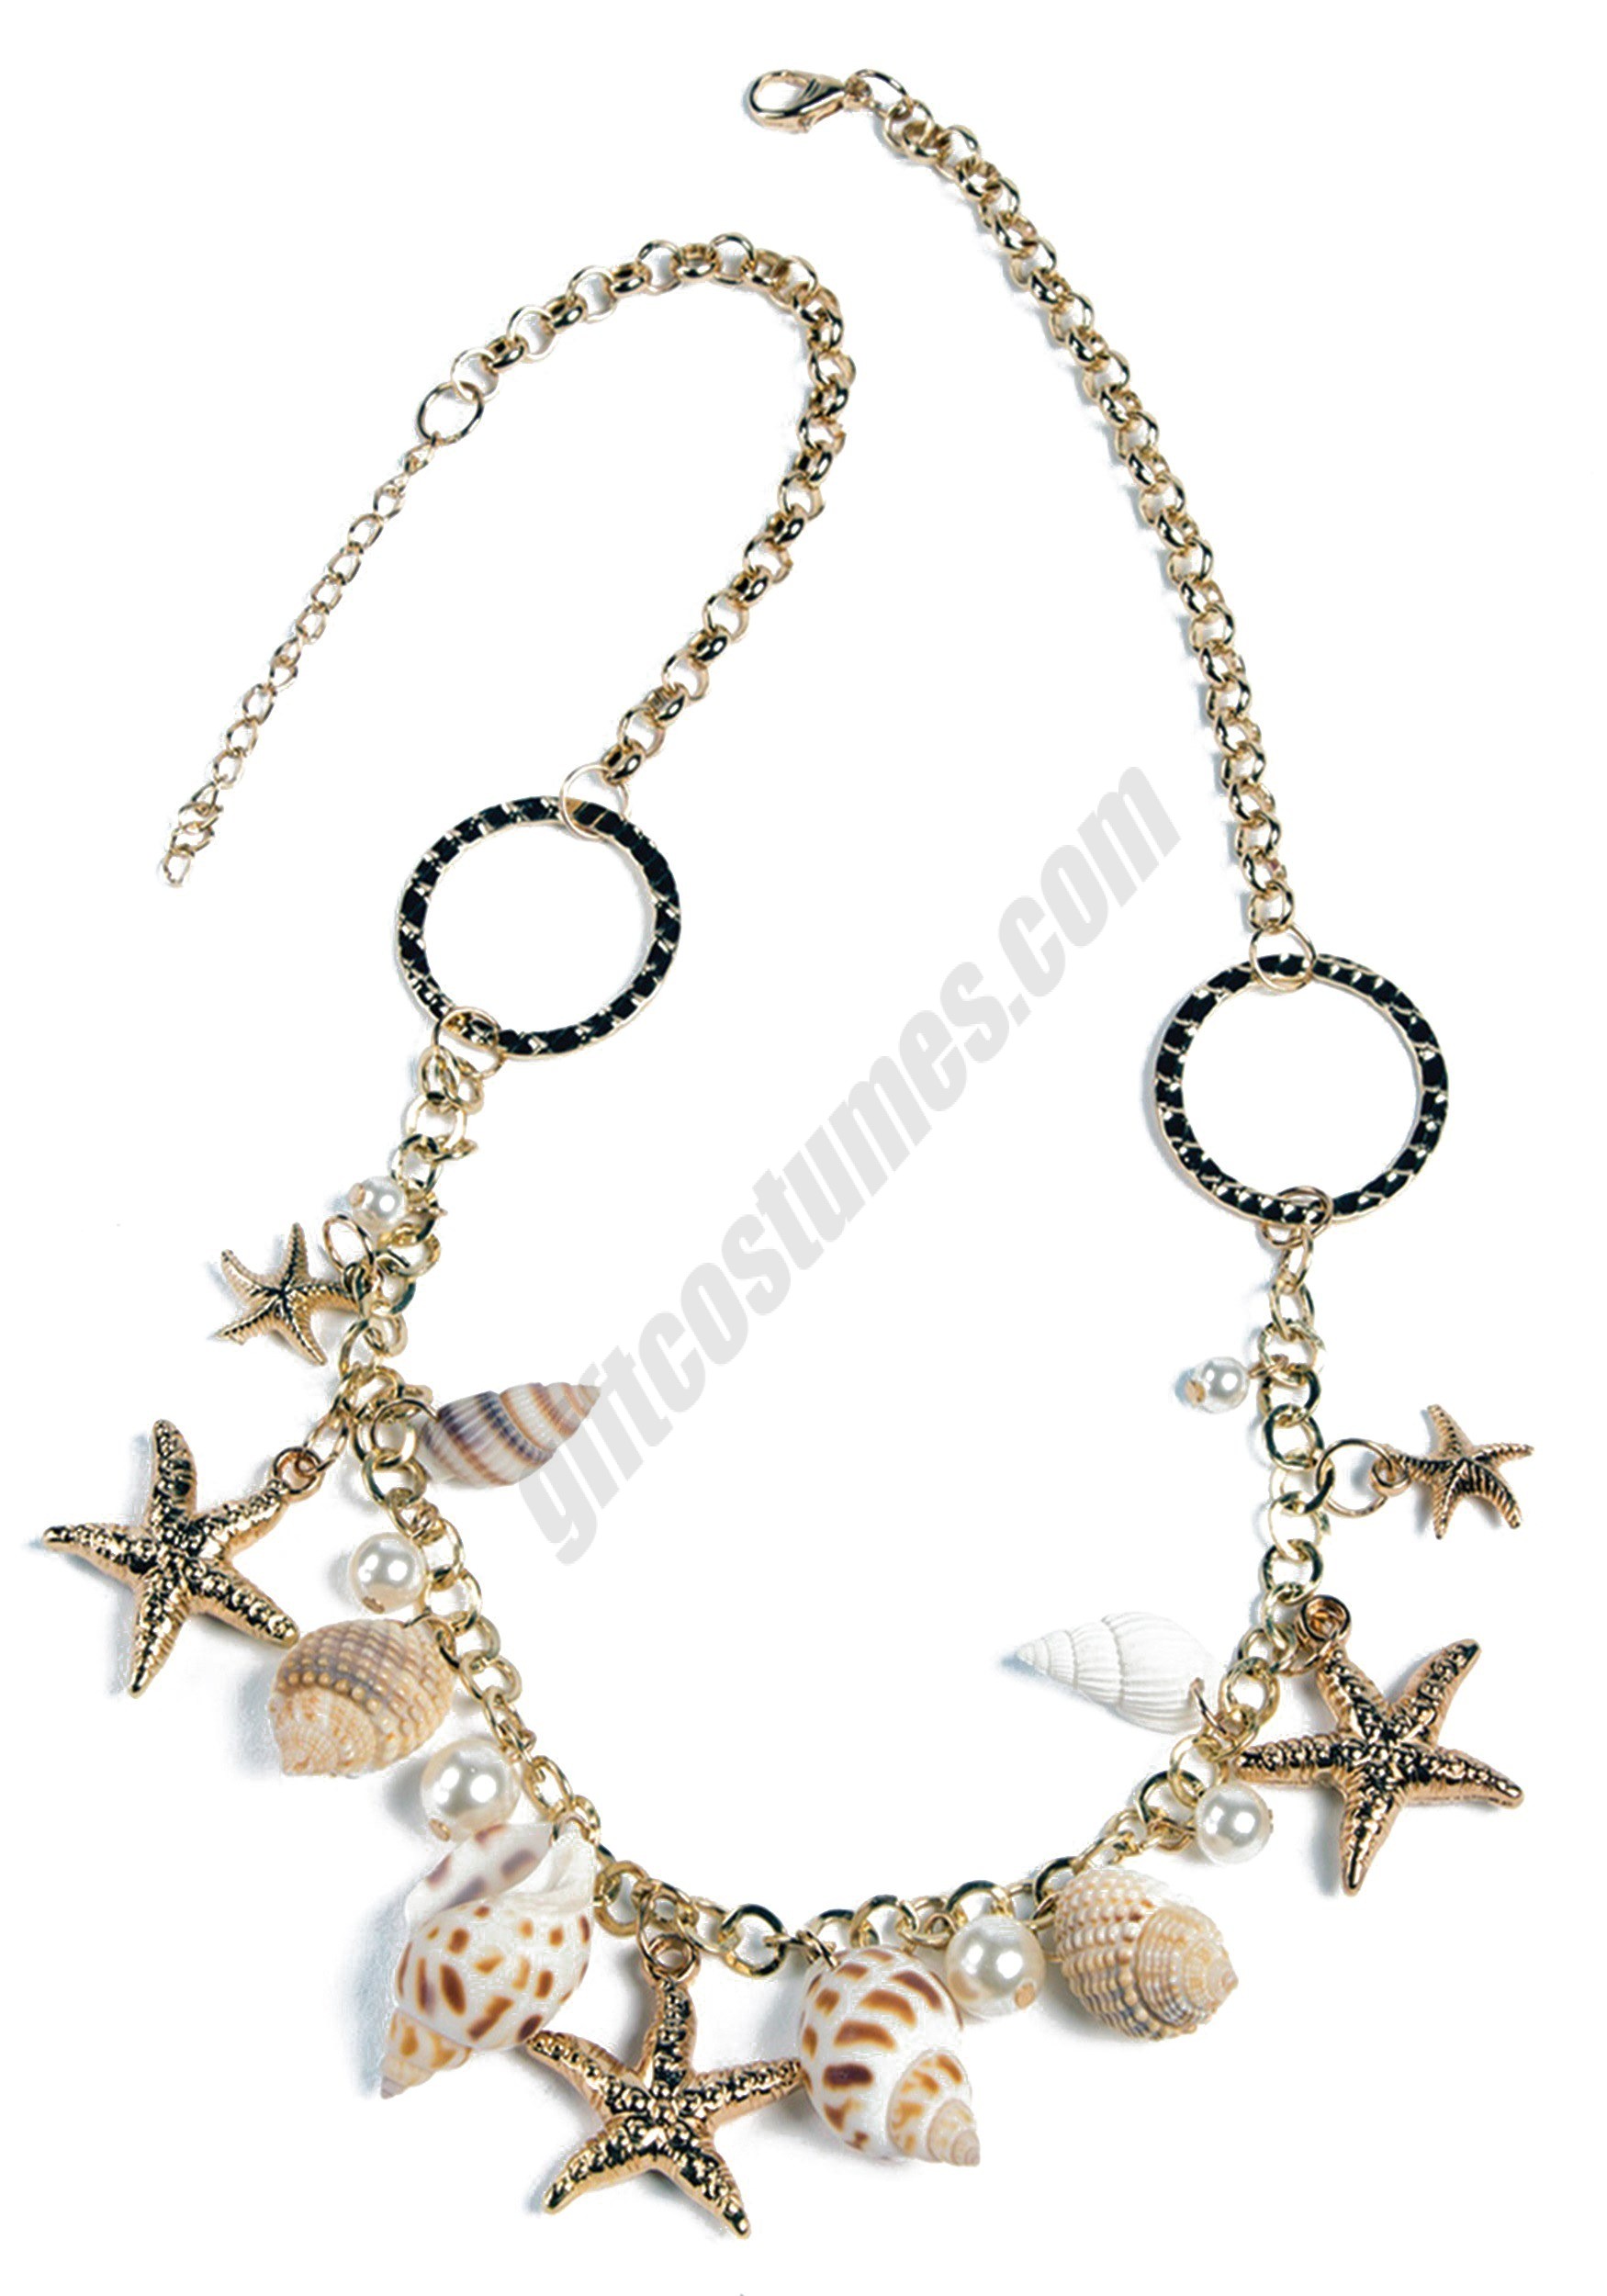 Mermaid Necklace Promotions - Mermaid Necklace Promotions